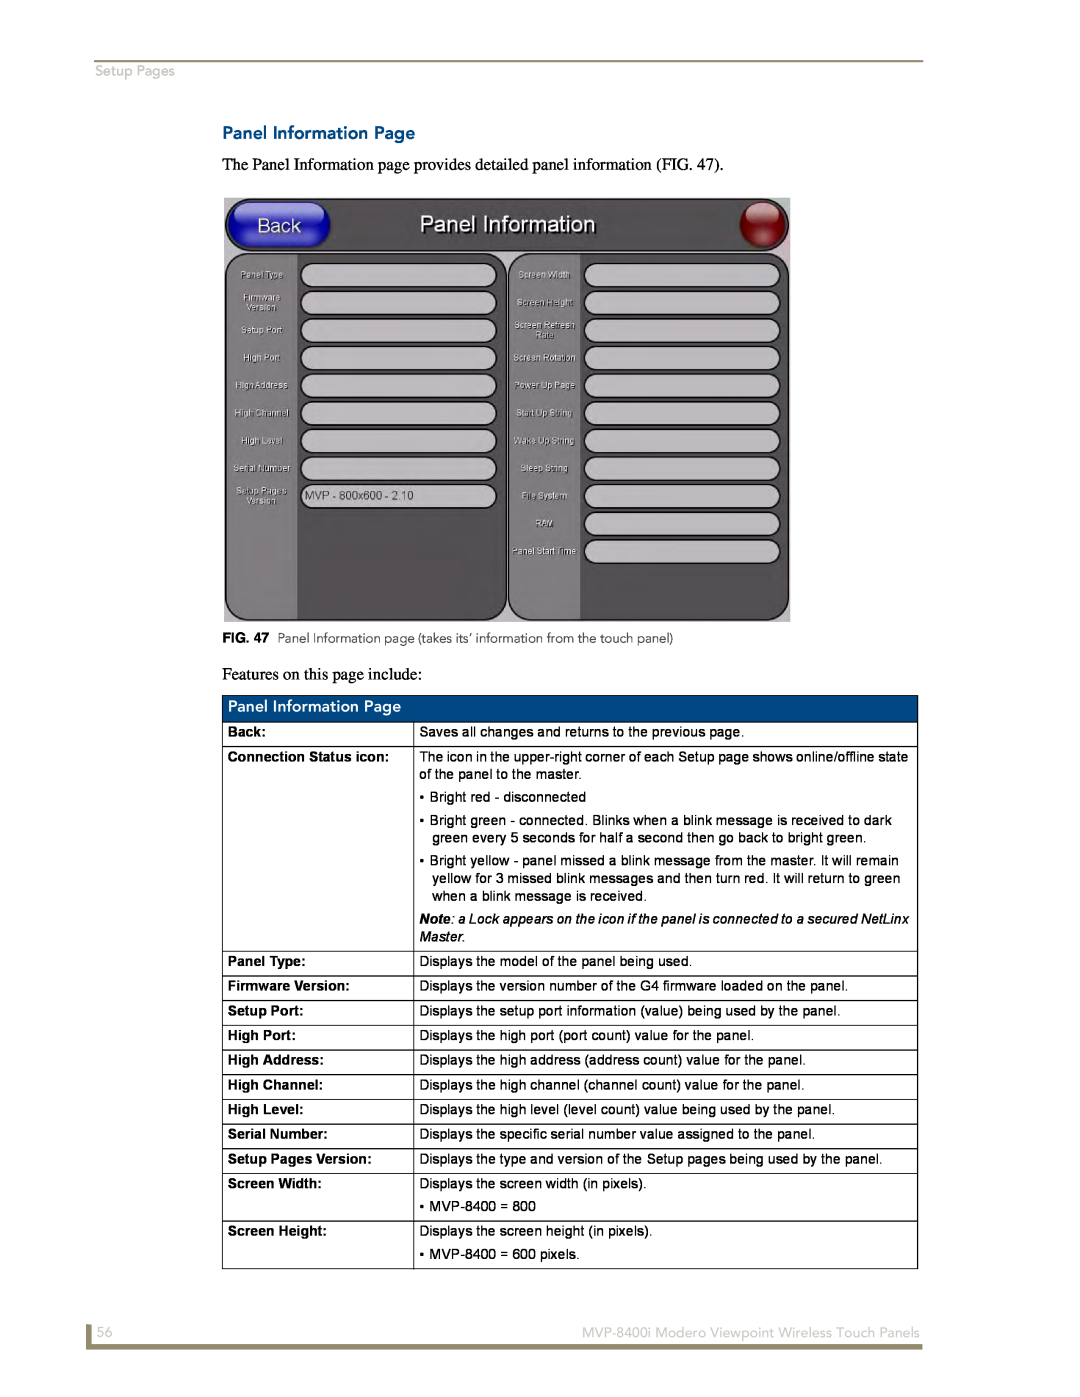 AMX MVP-8400i Panel Information Page, Setup Pages, Back, Connection Status icon, Master, Panel Type, Firmware Version 